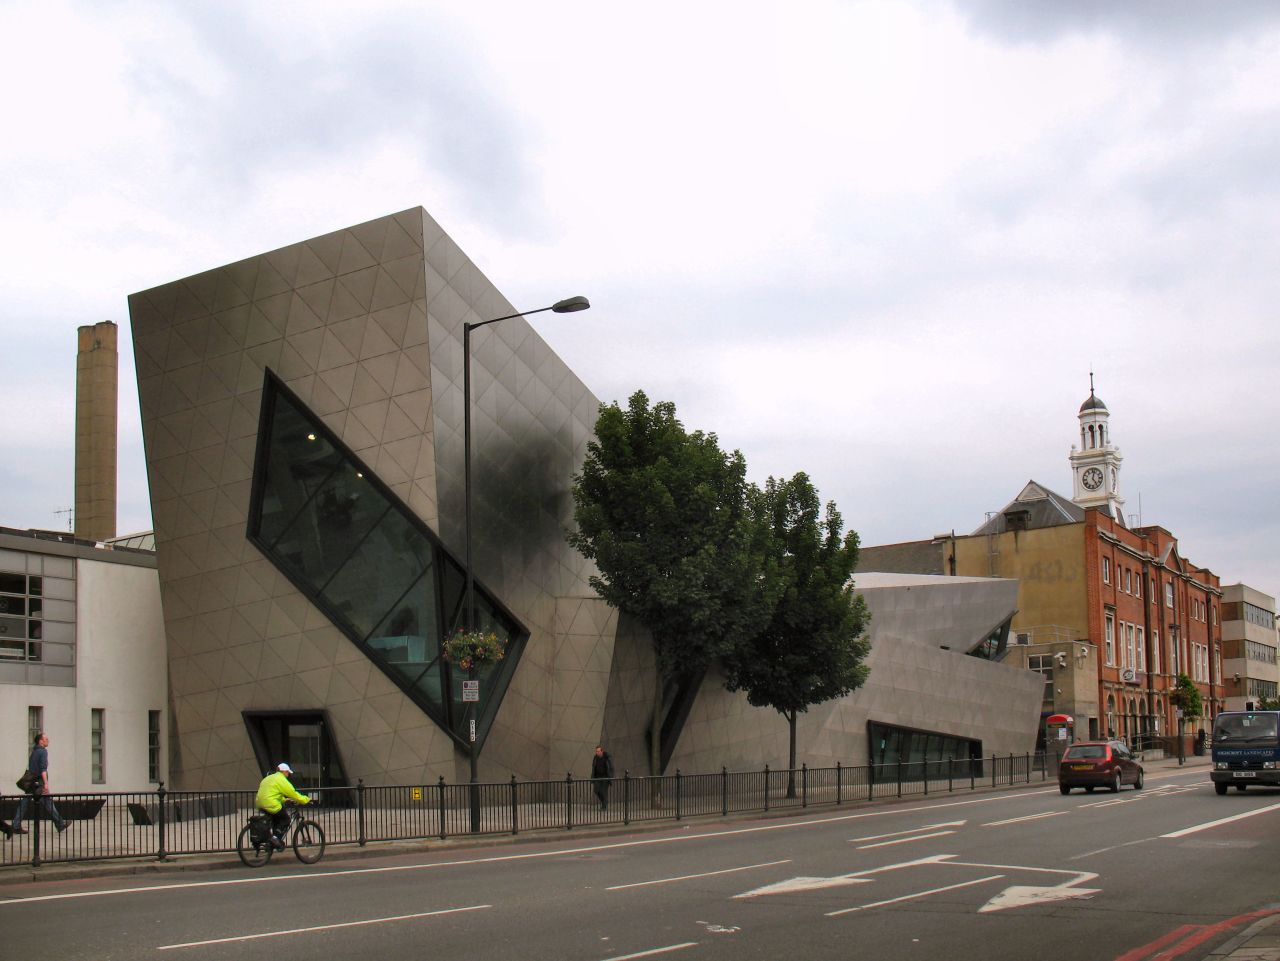 The building won the "RIBA Award" in 2004, and the "Building of the Year Award -- Royal Fine Arts Commission Trust -- Jeu D'Esprit" in 2005. The building acts as a gateway to the London Metropolitan University on Holloway Road. <strong>Architects:</strong> Daniel Libeskind.